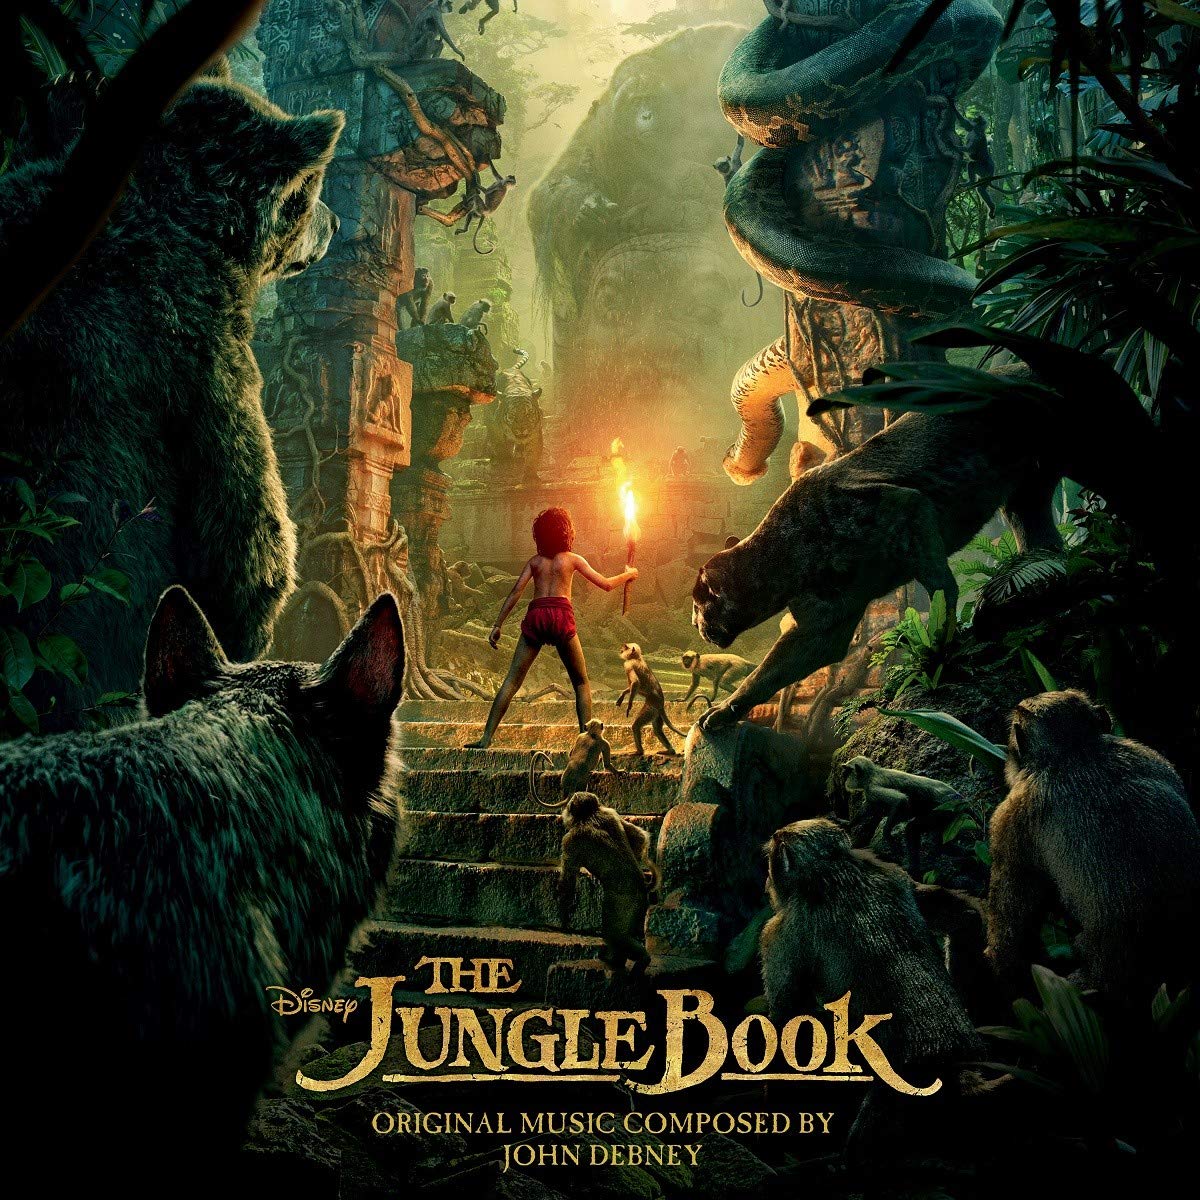 download the new for windows The Jungle Book